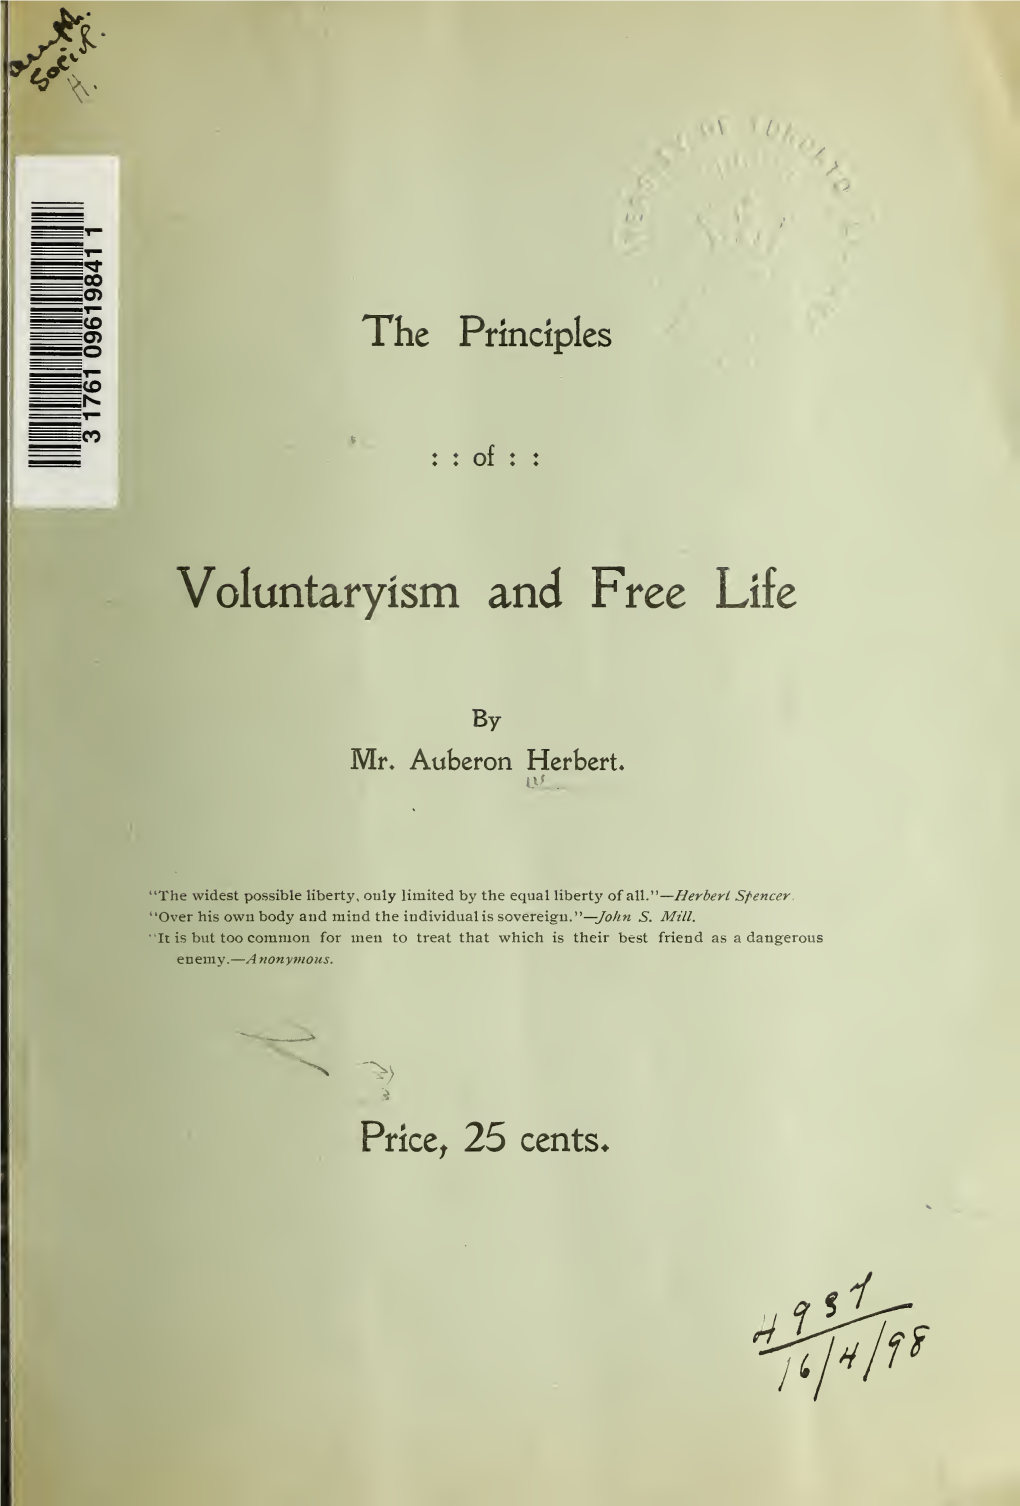 The Principles of Voluntaryism and Free Life